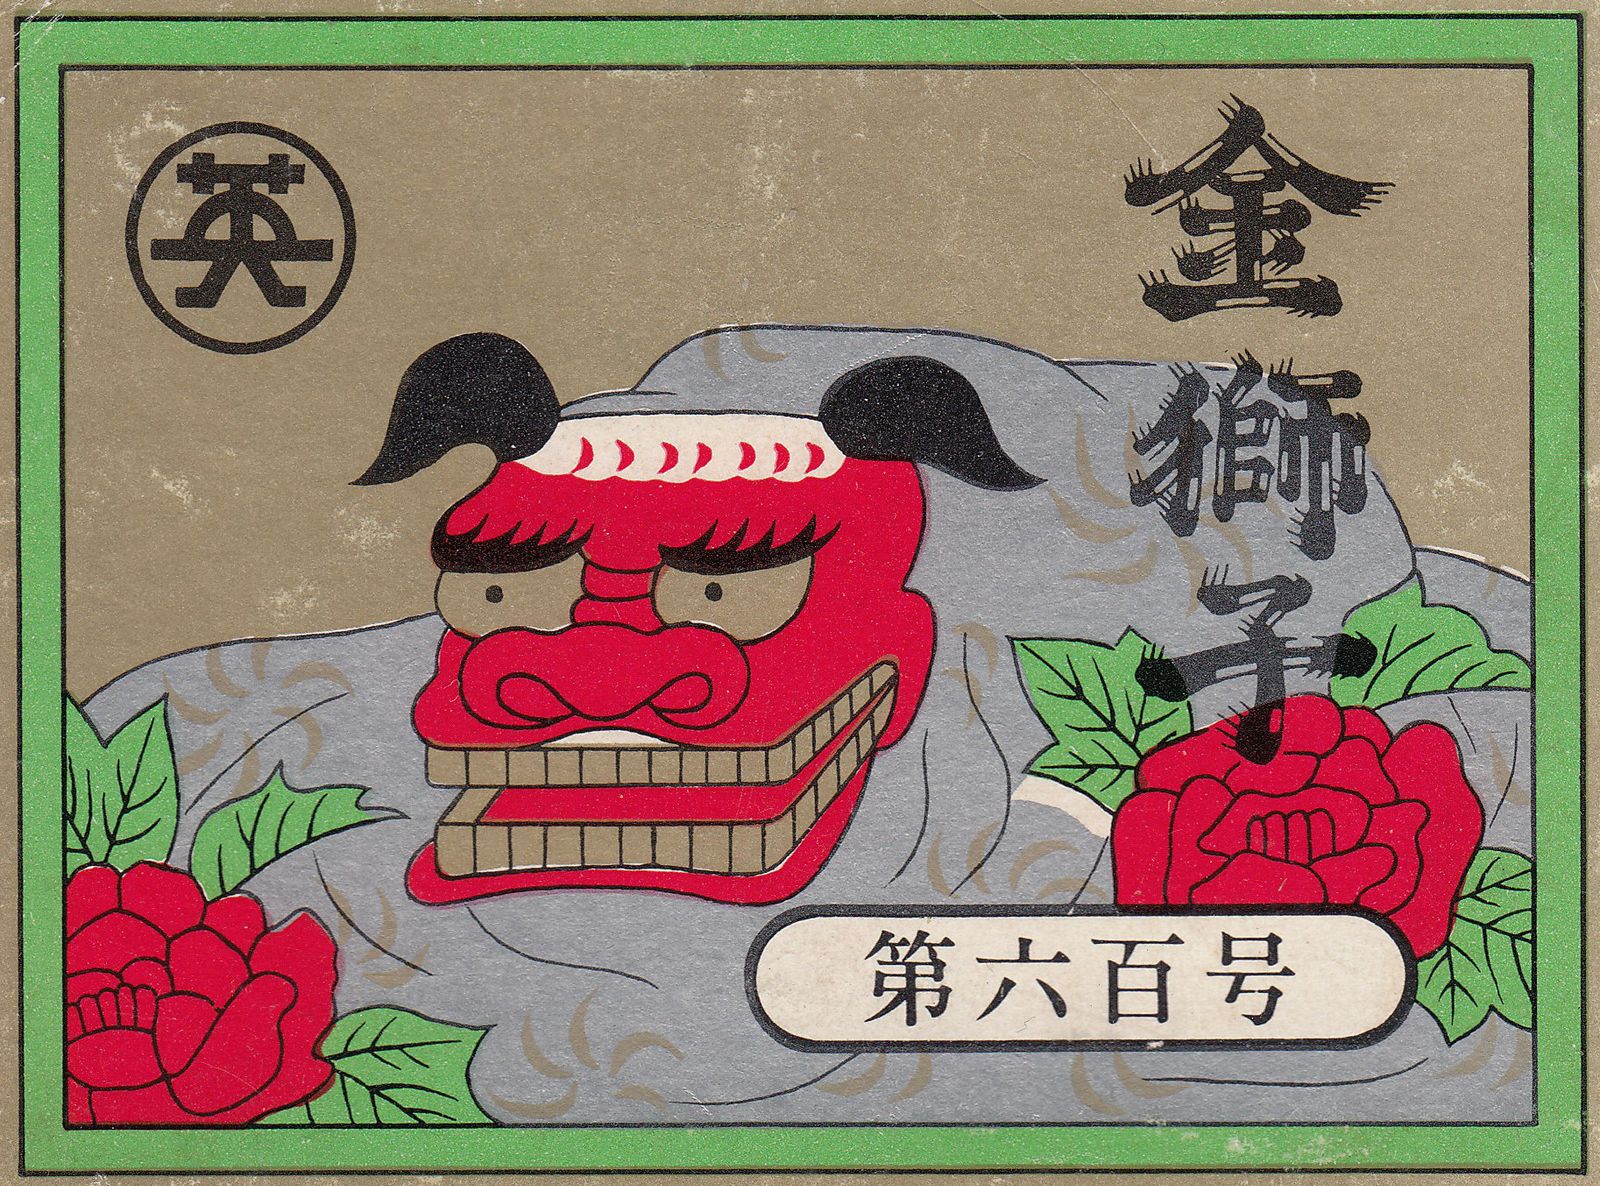 A Hanafuda box with a lion and roses or peonies.